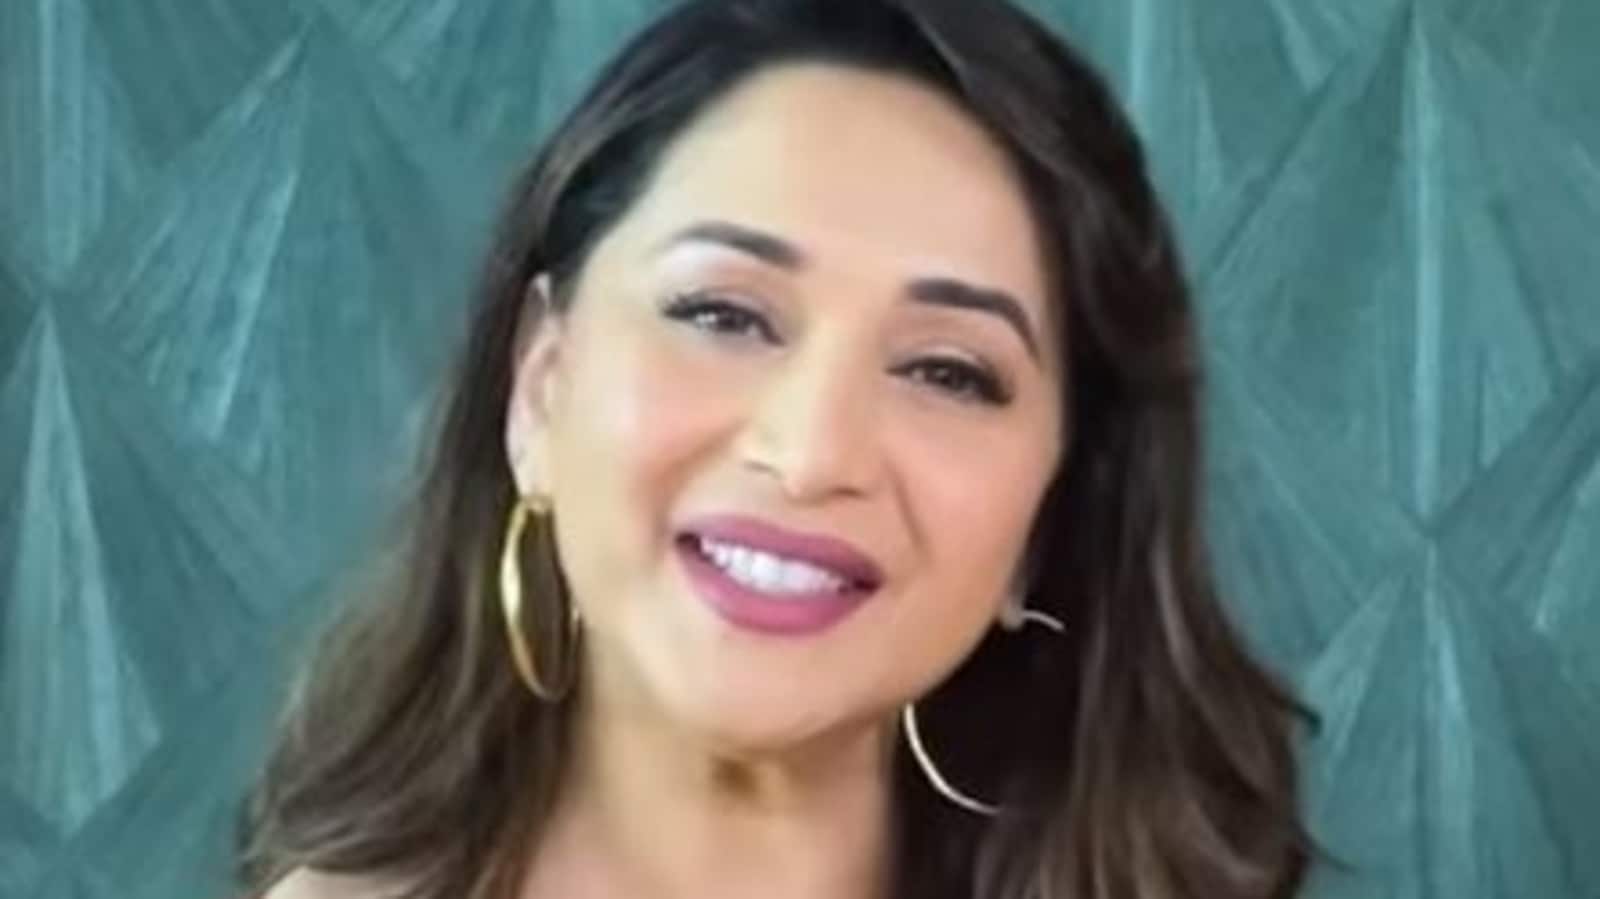 When Madhuri Dixit’s dad’s house was raided and she was shooting a comedy scene